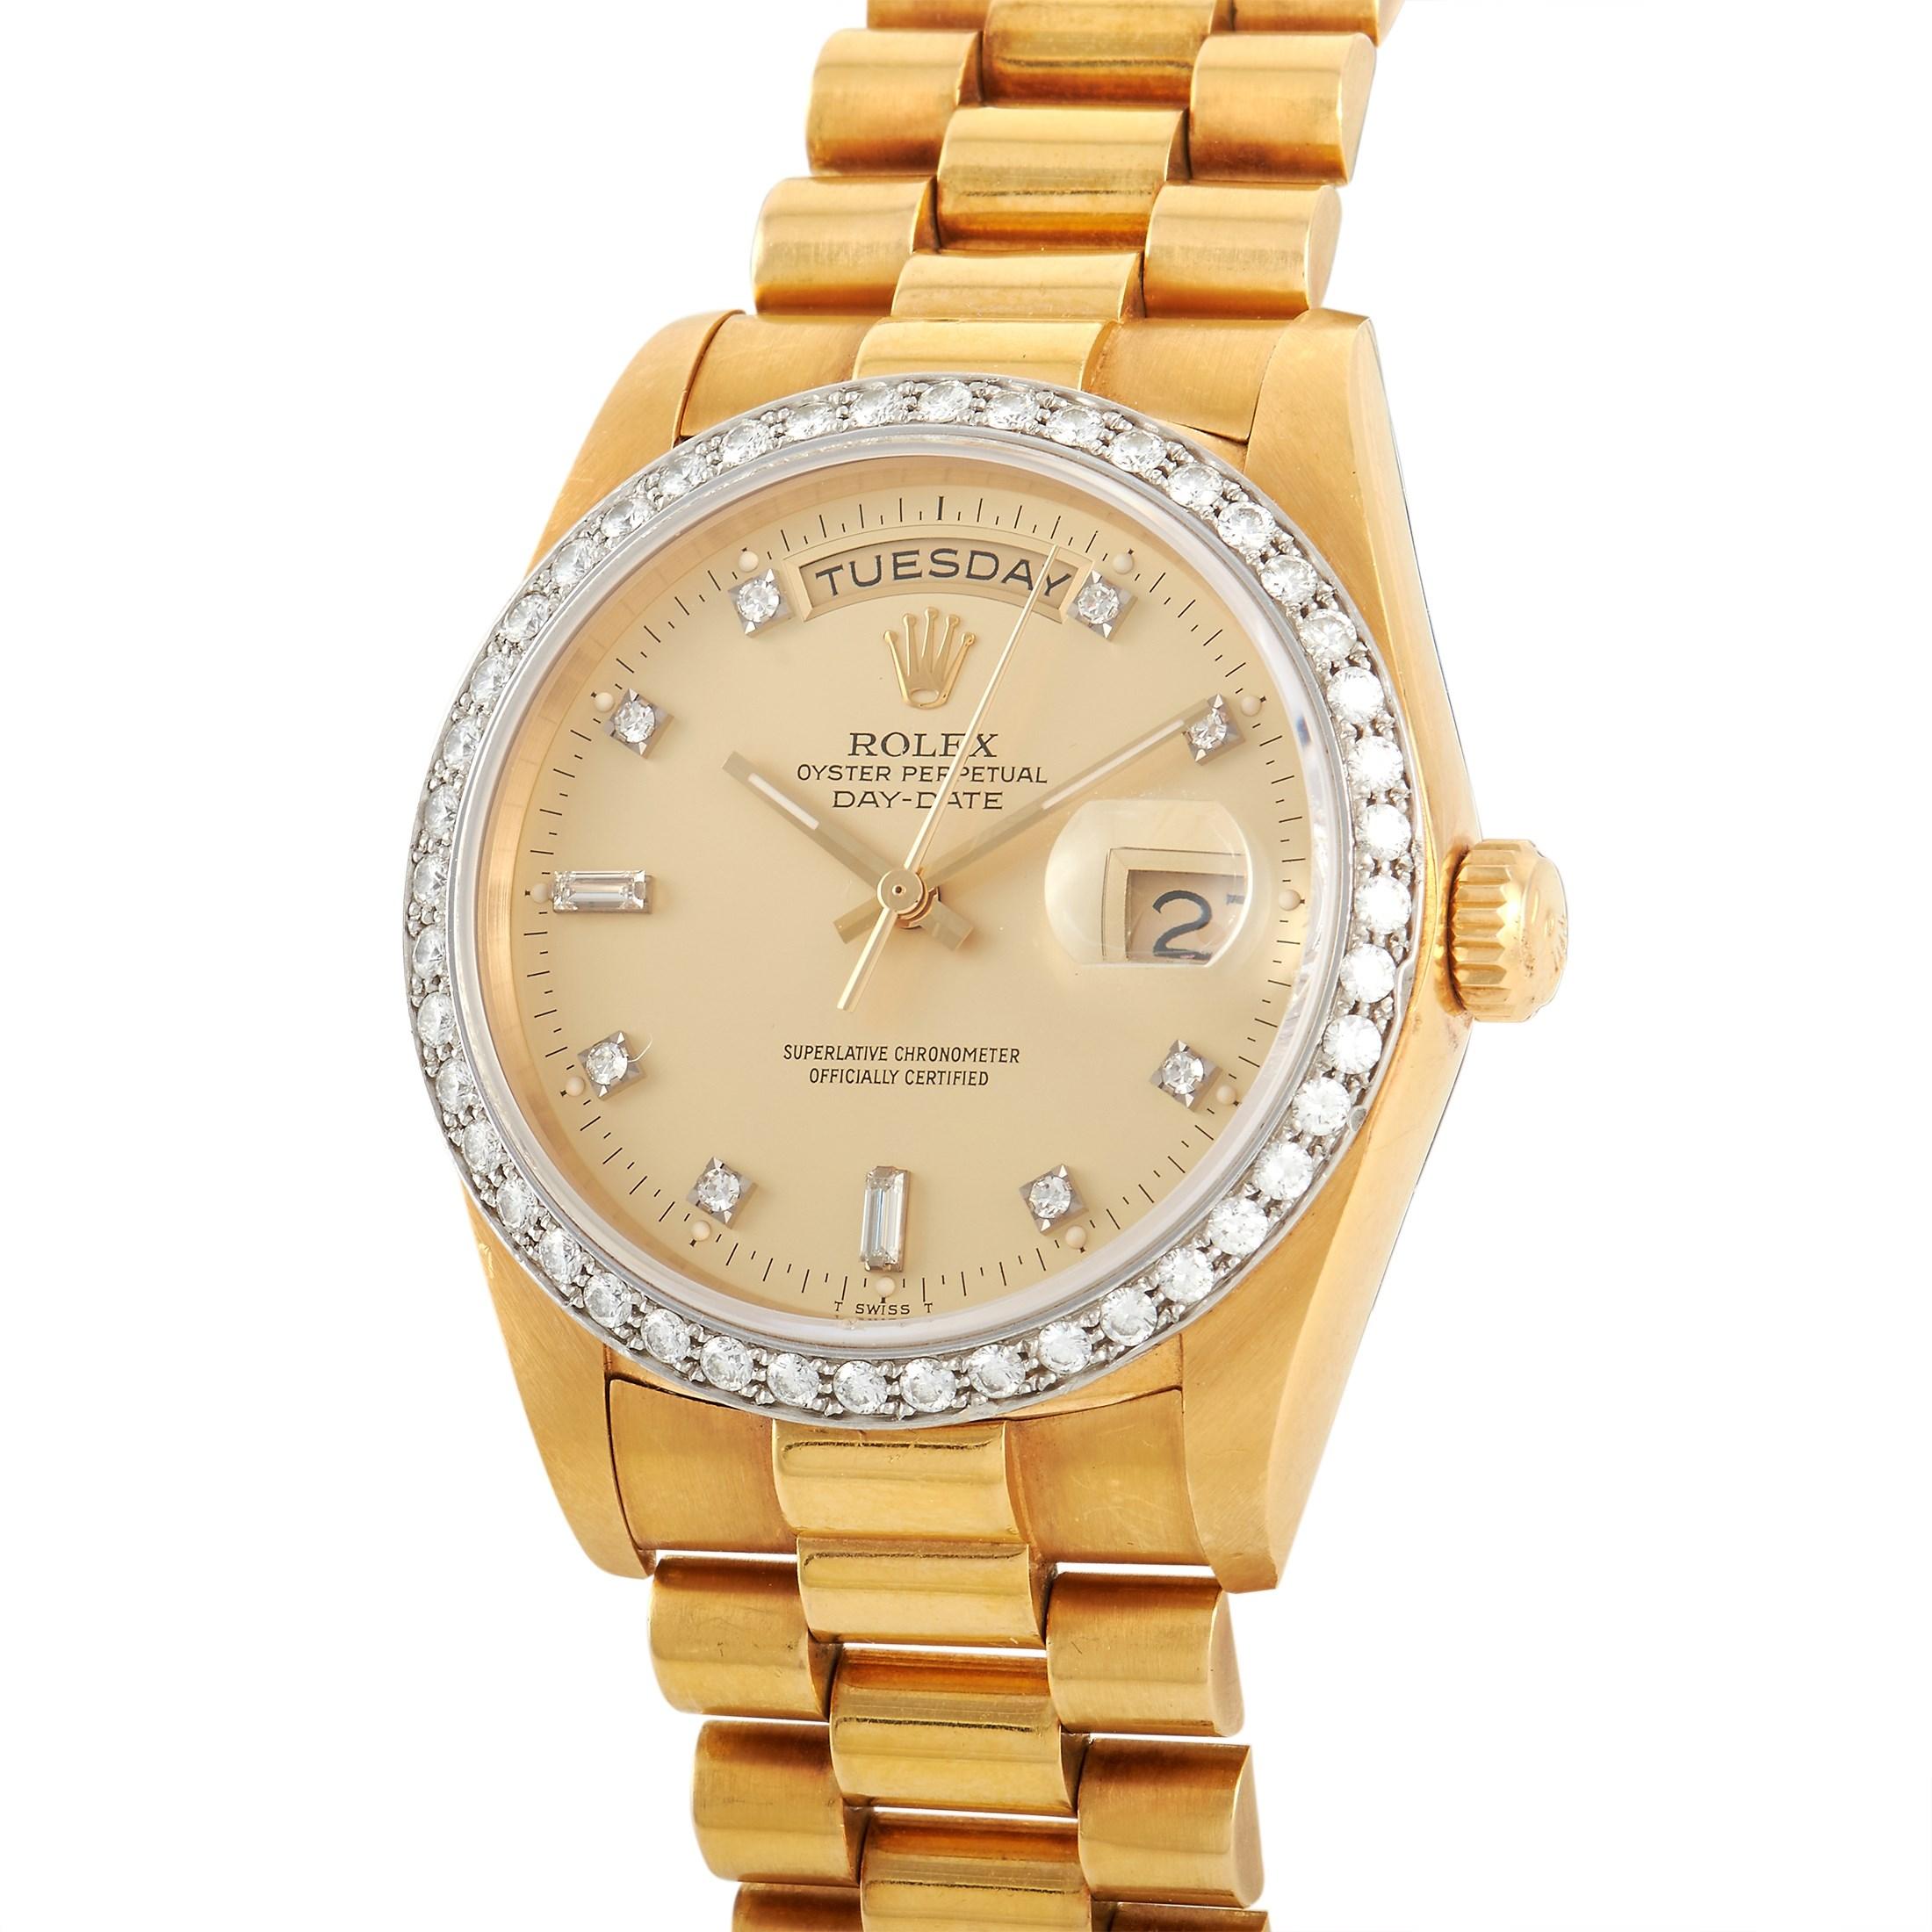 The Rolex Day-Date Diamond Watch, reference number 18048, is a luxury timepiece that requires no introduction. 

Crafted from precious materials, this watch includes a 42mm case, bracelet, and bezel made from 18K Yellow Gold - but what truly sets